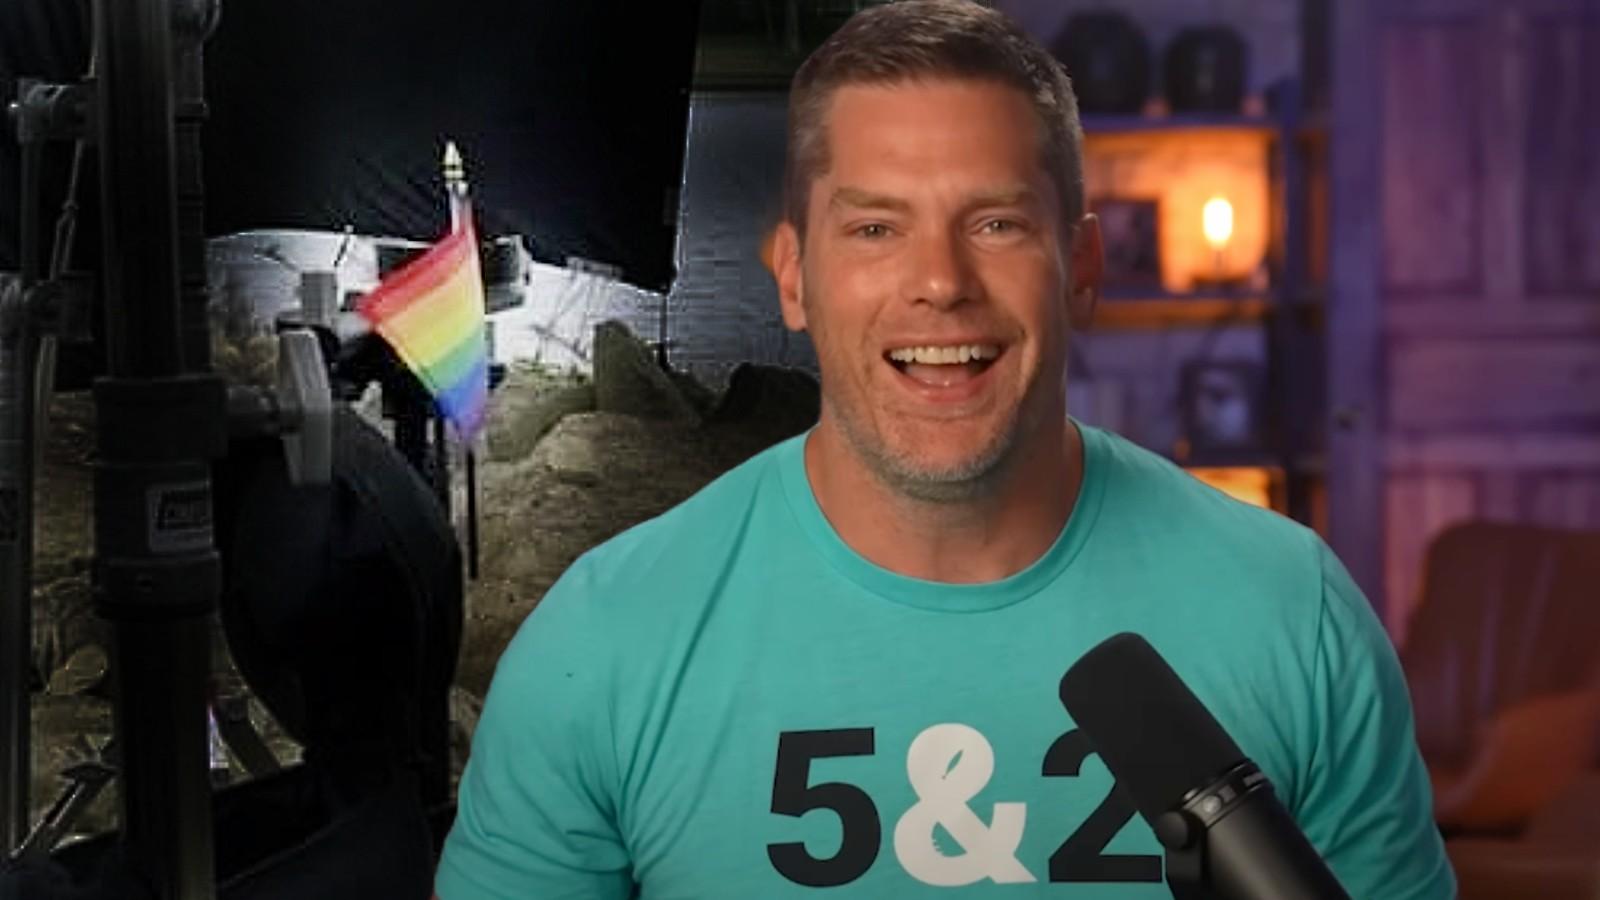 Dallas Jenkins and the Pride flag on The Chosen set